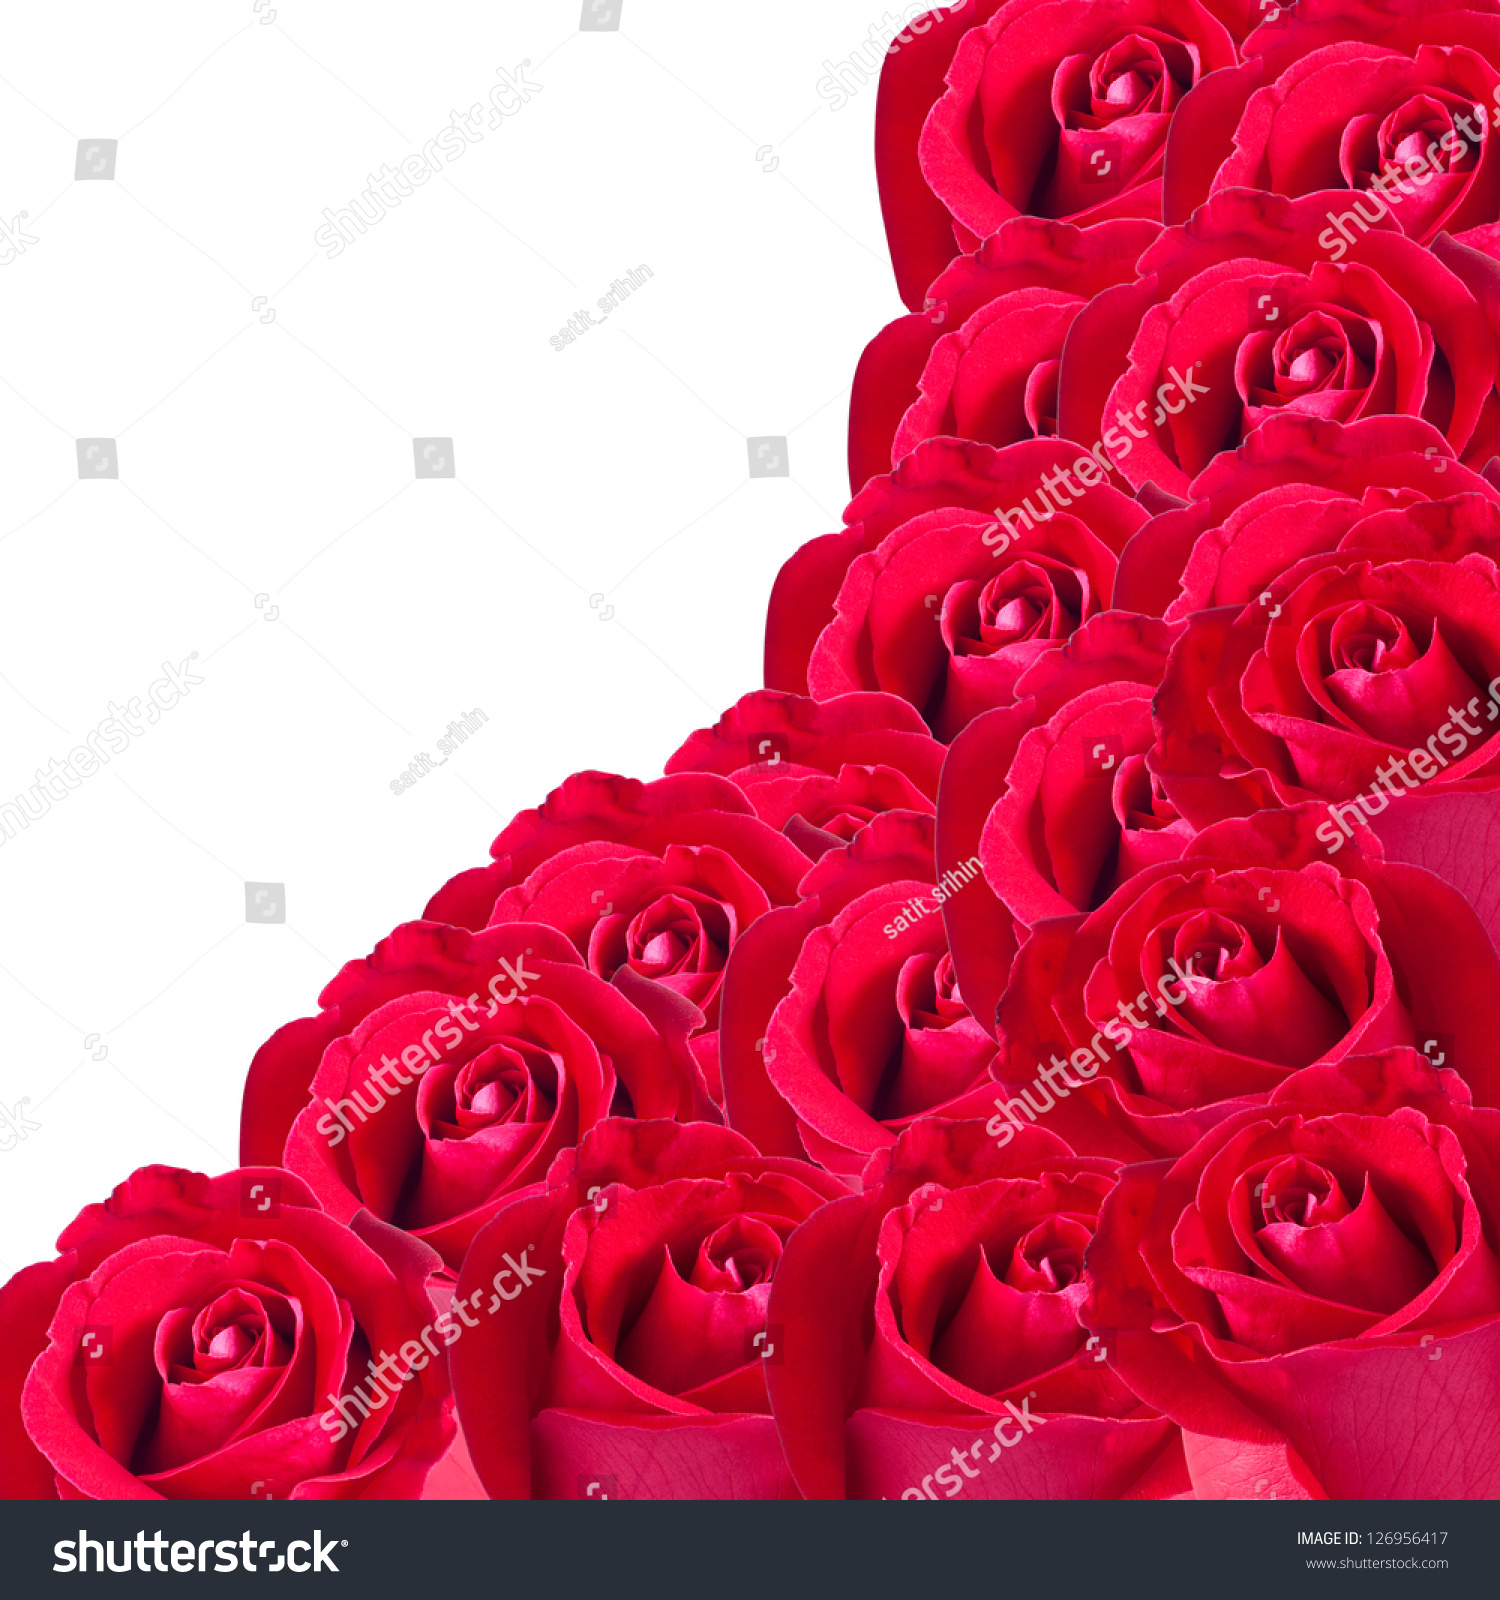 Beautiful Red Rose Isolated On White Background Stock Photo 126956417